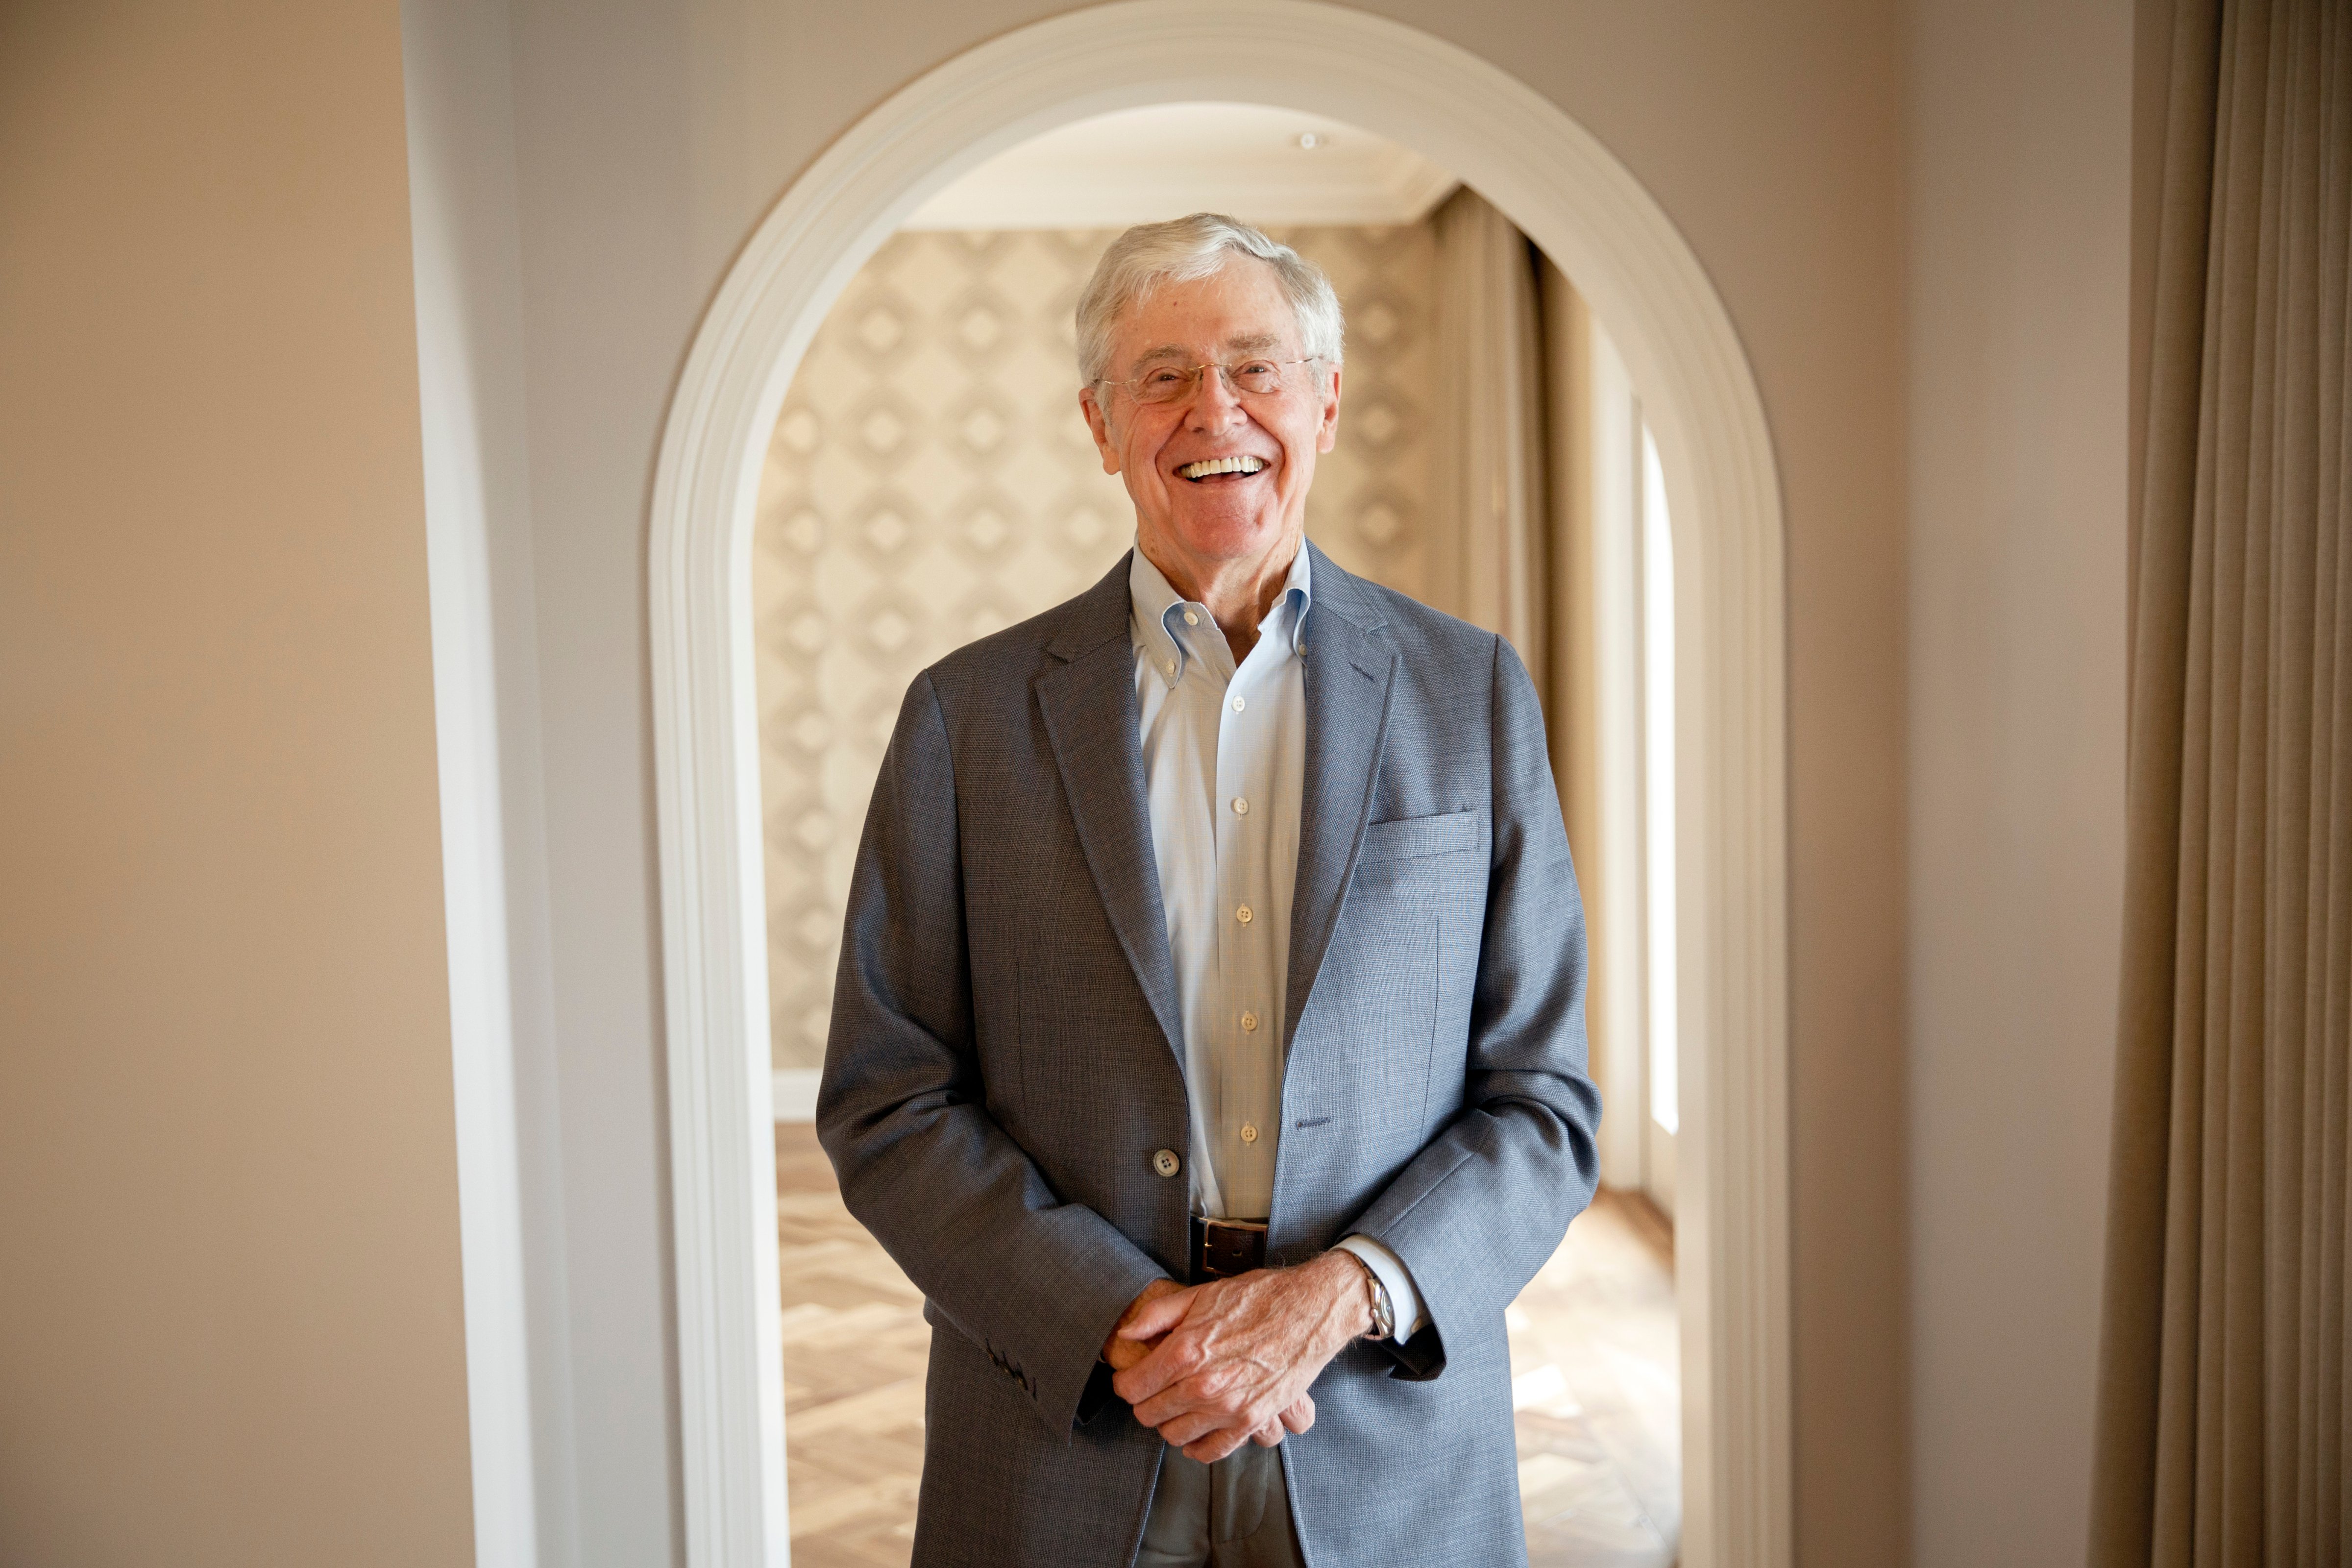 Charles Koch stands for a portrait after an interview with the Washington Post at the Freedom Partners Summit on Aug. 3, 2015 in Dana Point, CA (Patrick T. Fallon—The Washington Post/Getty Images)